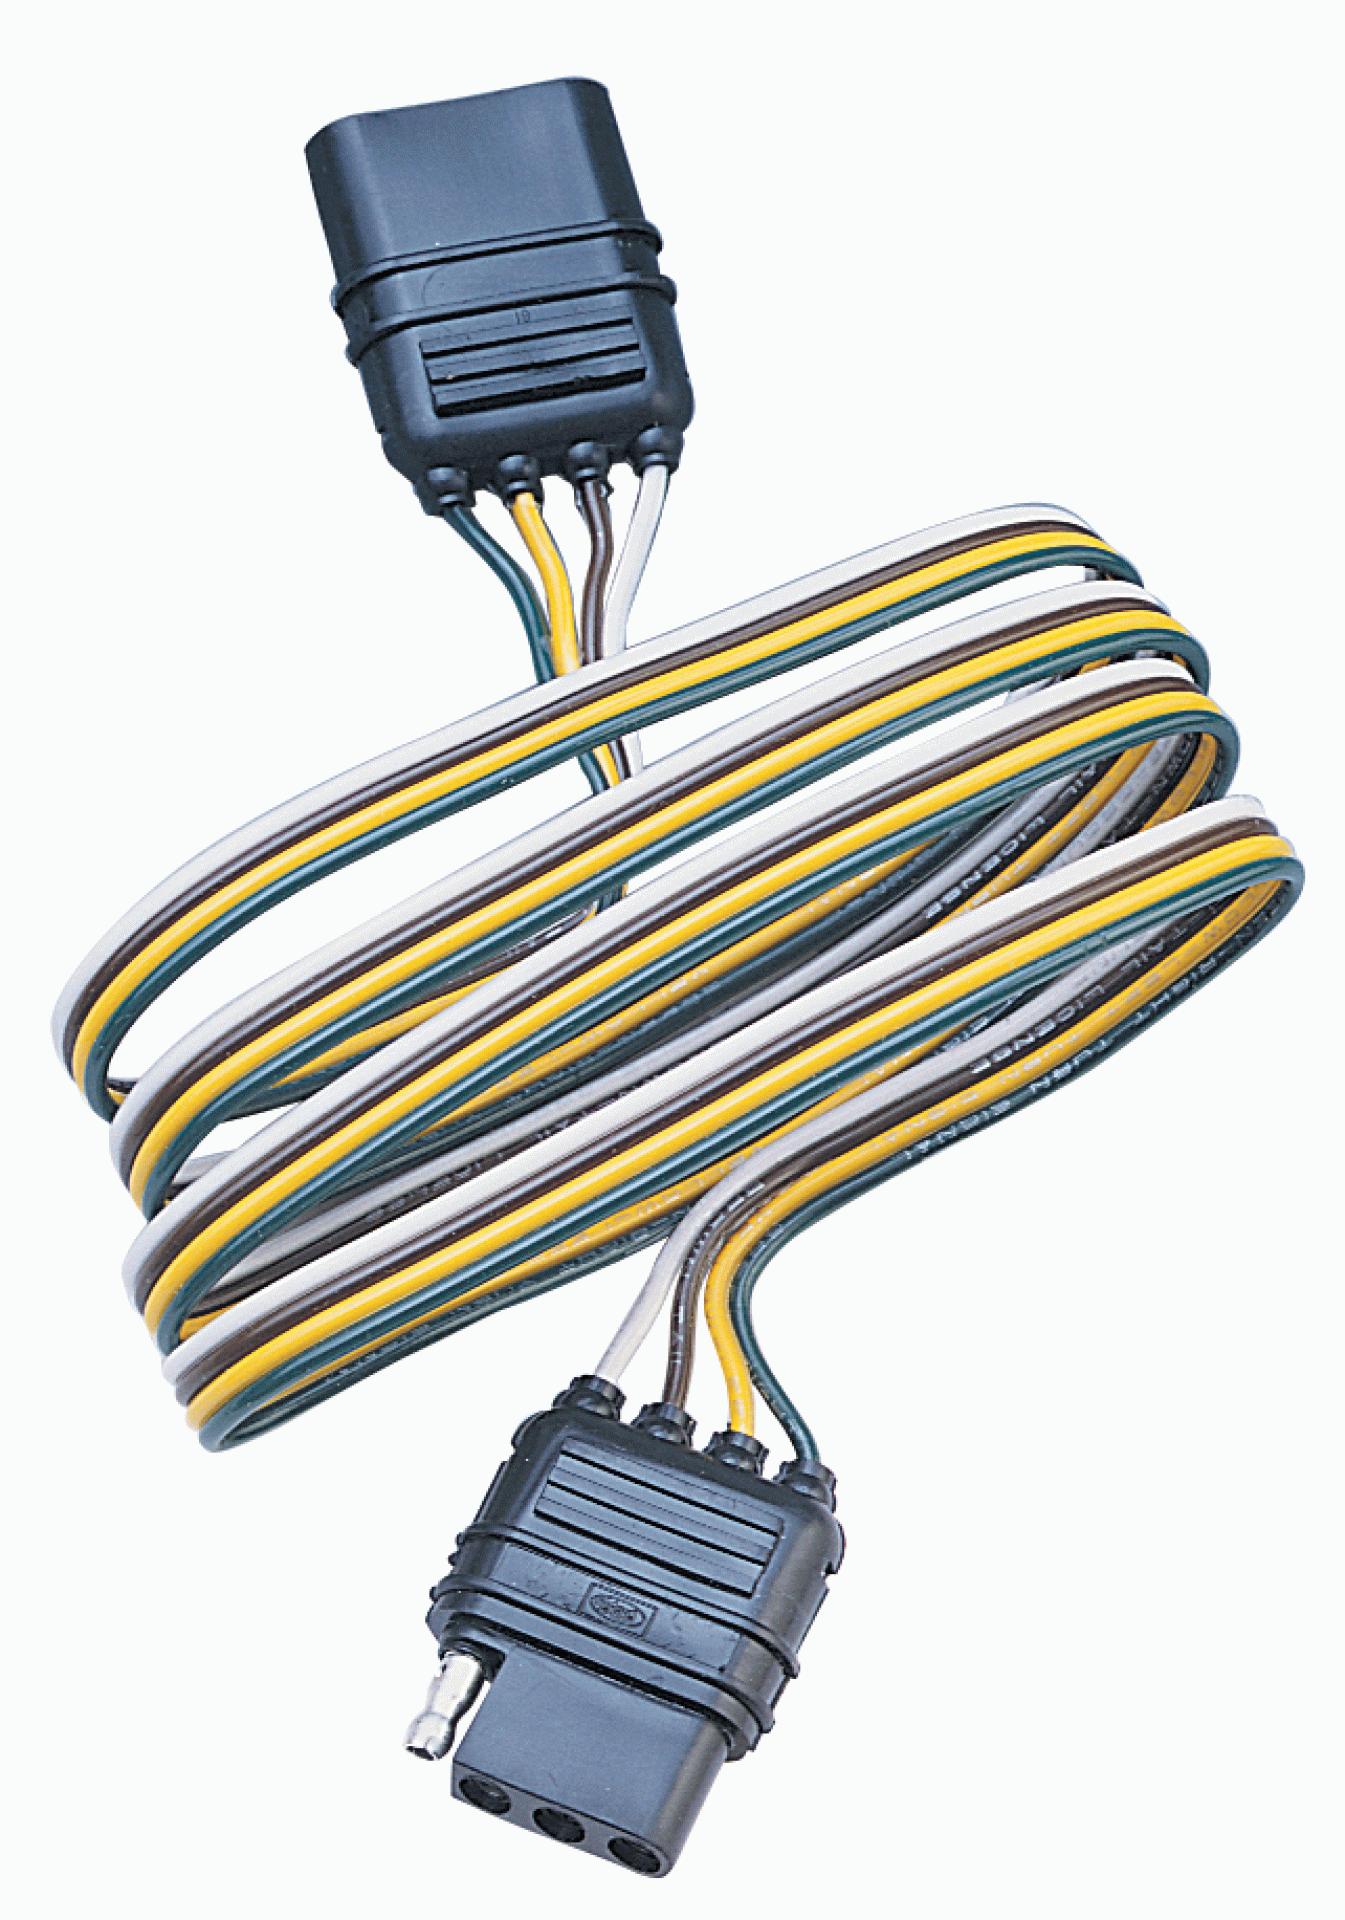 HOPKINS MFG CORP | 47115 | CONNECTOR EXTENSION HARNESS 4 WIRE FLAT 4'